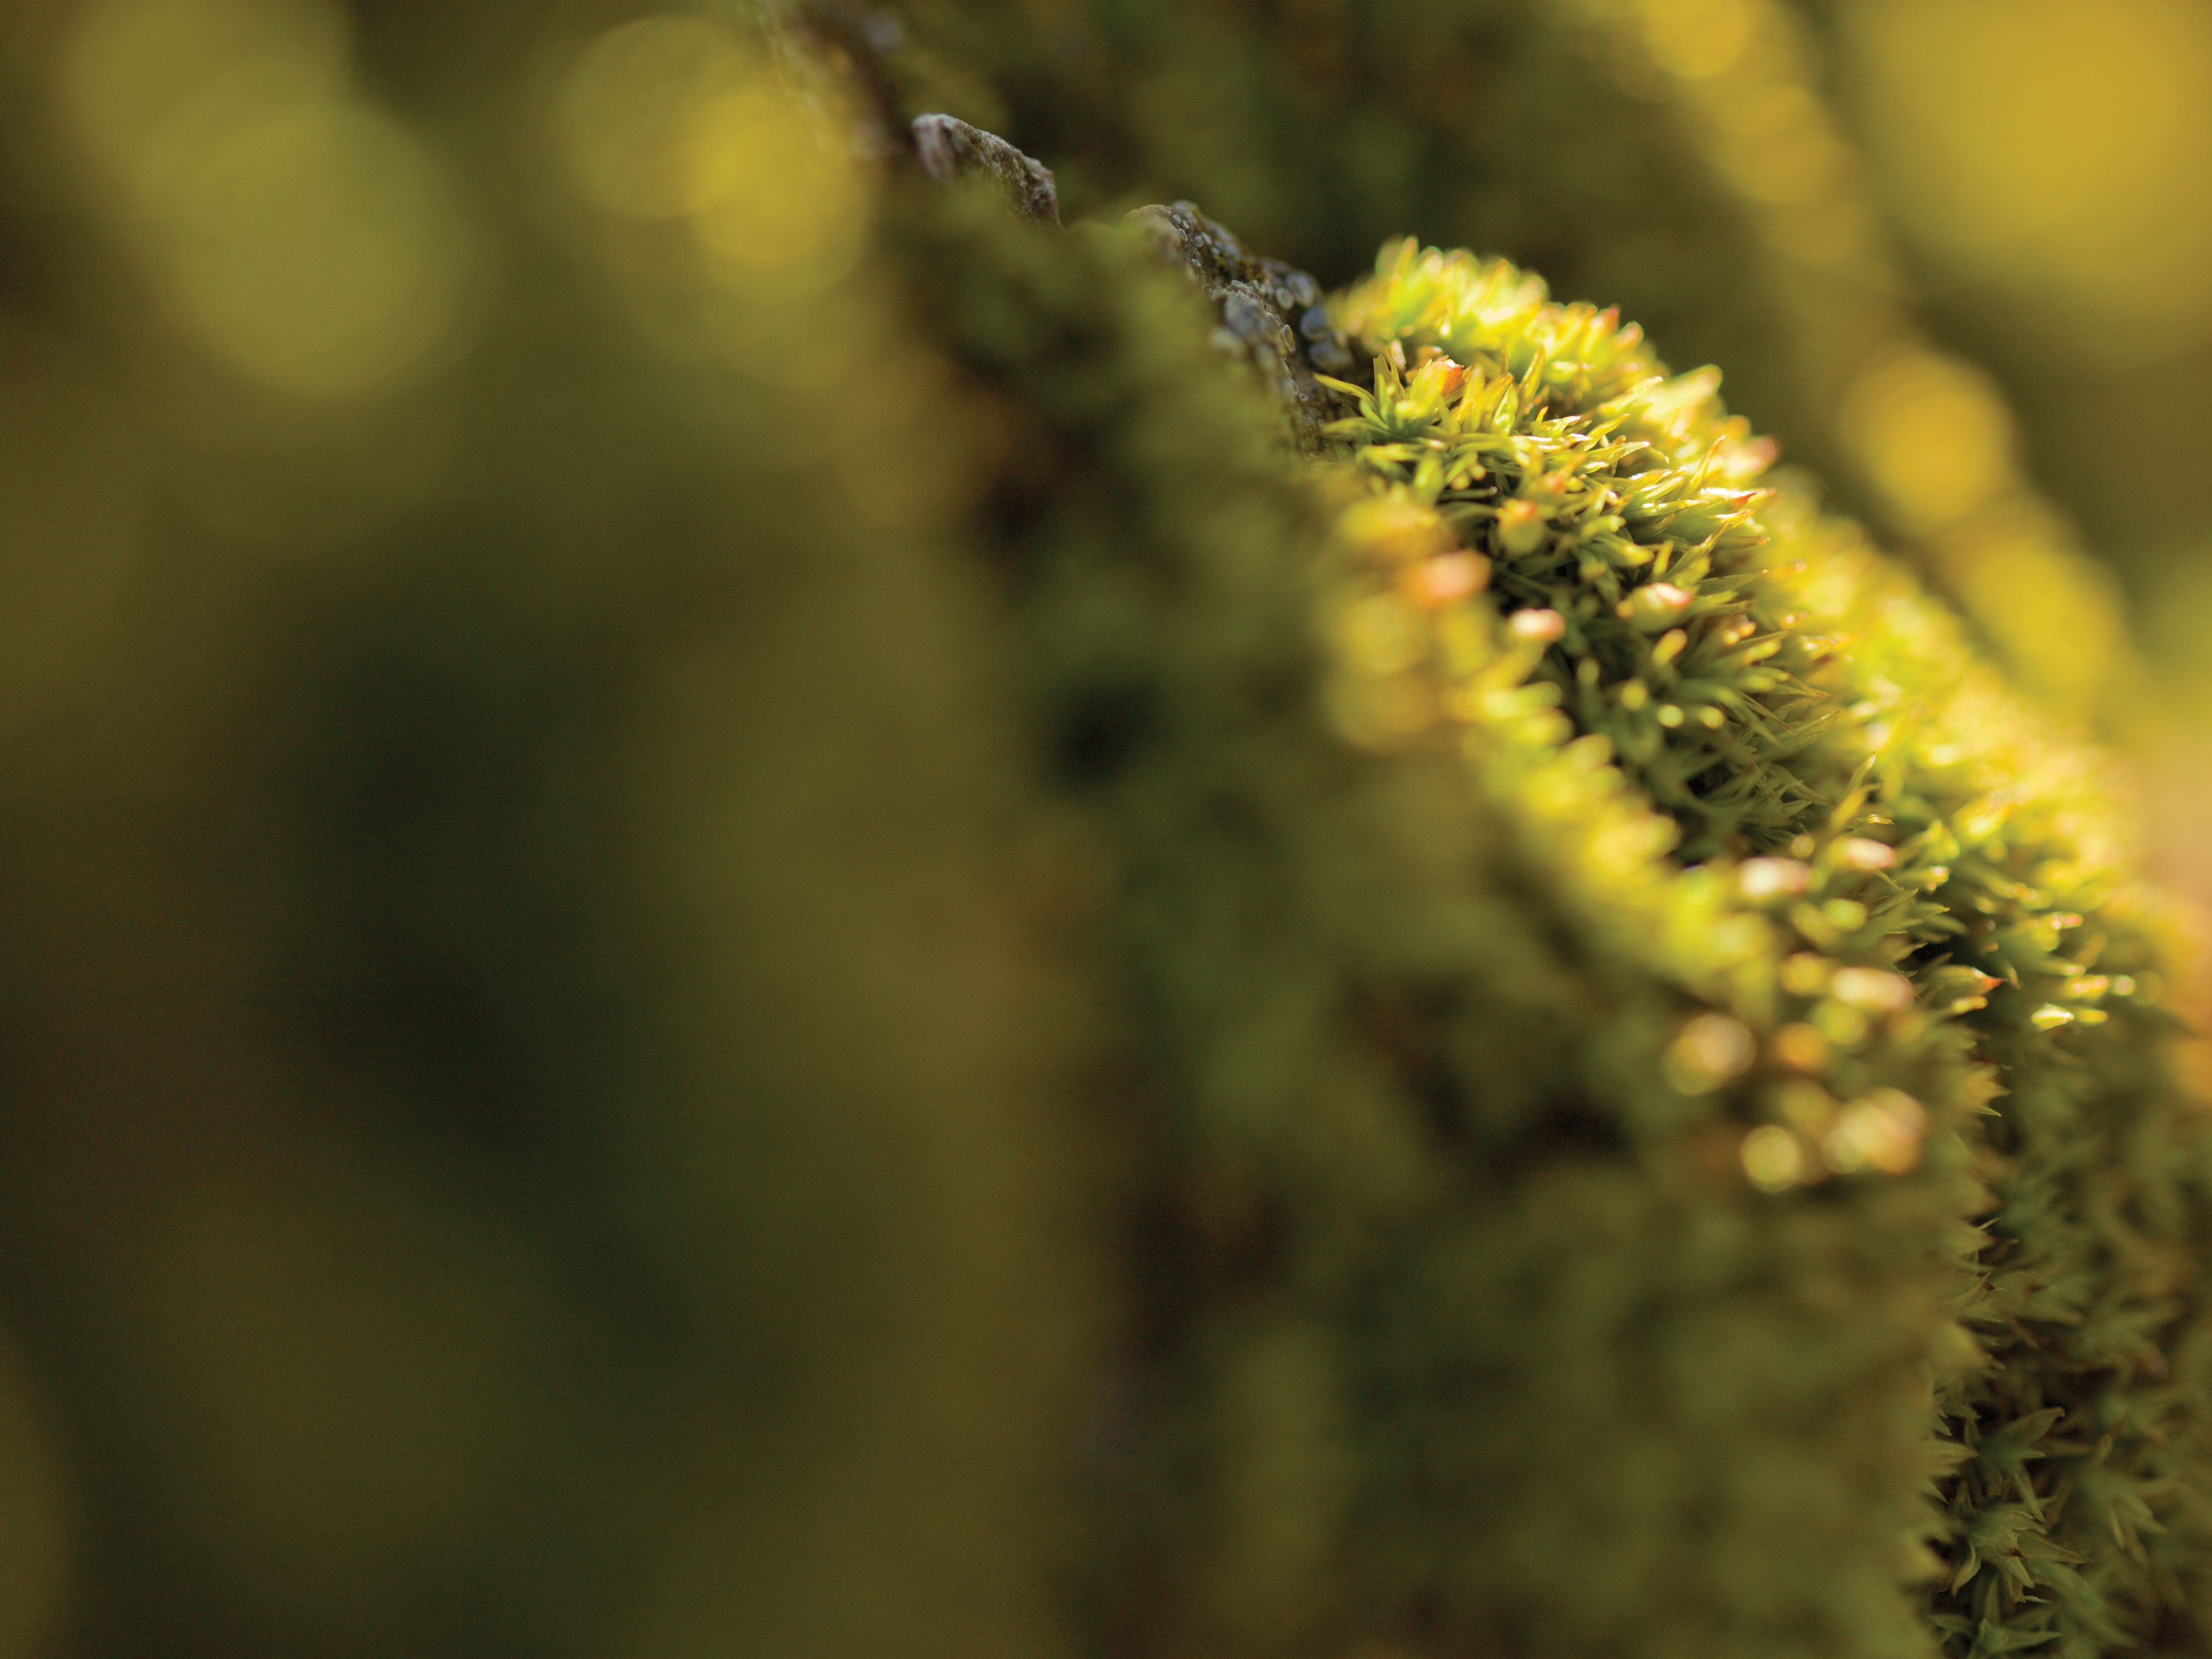 A detailed view of green moss growing on tree bark.